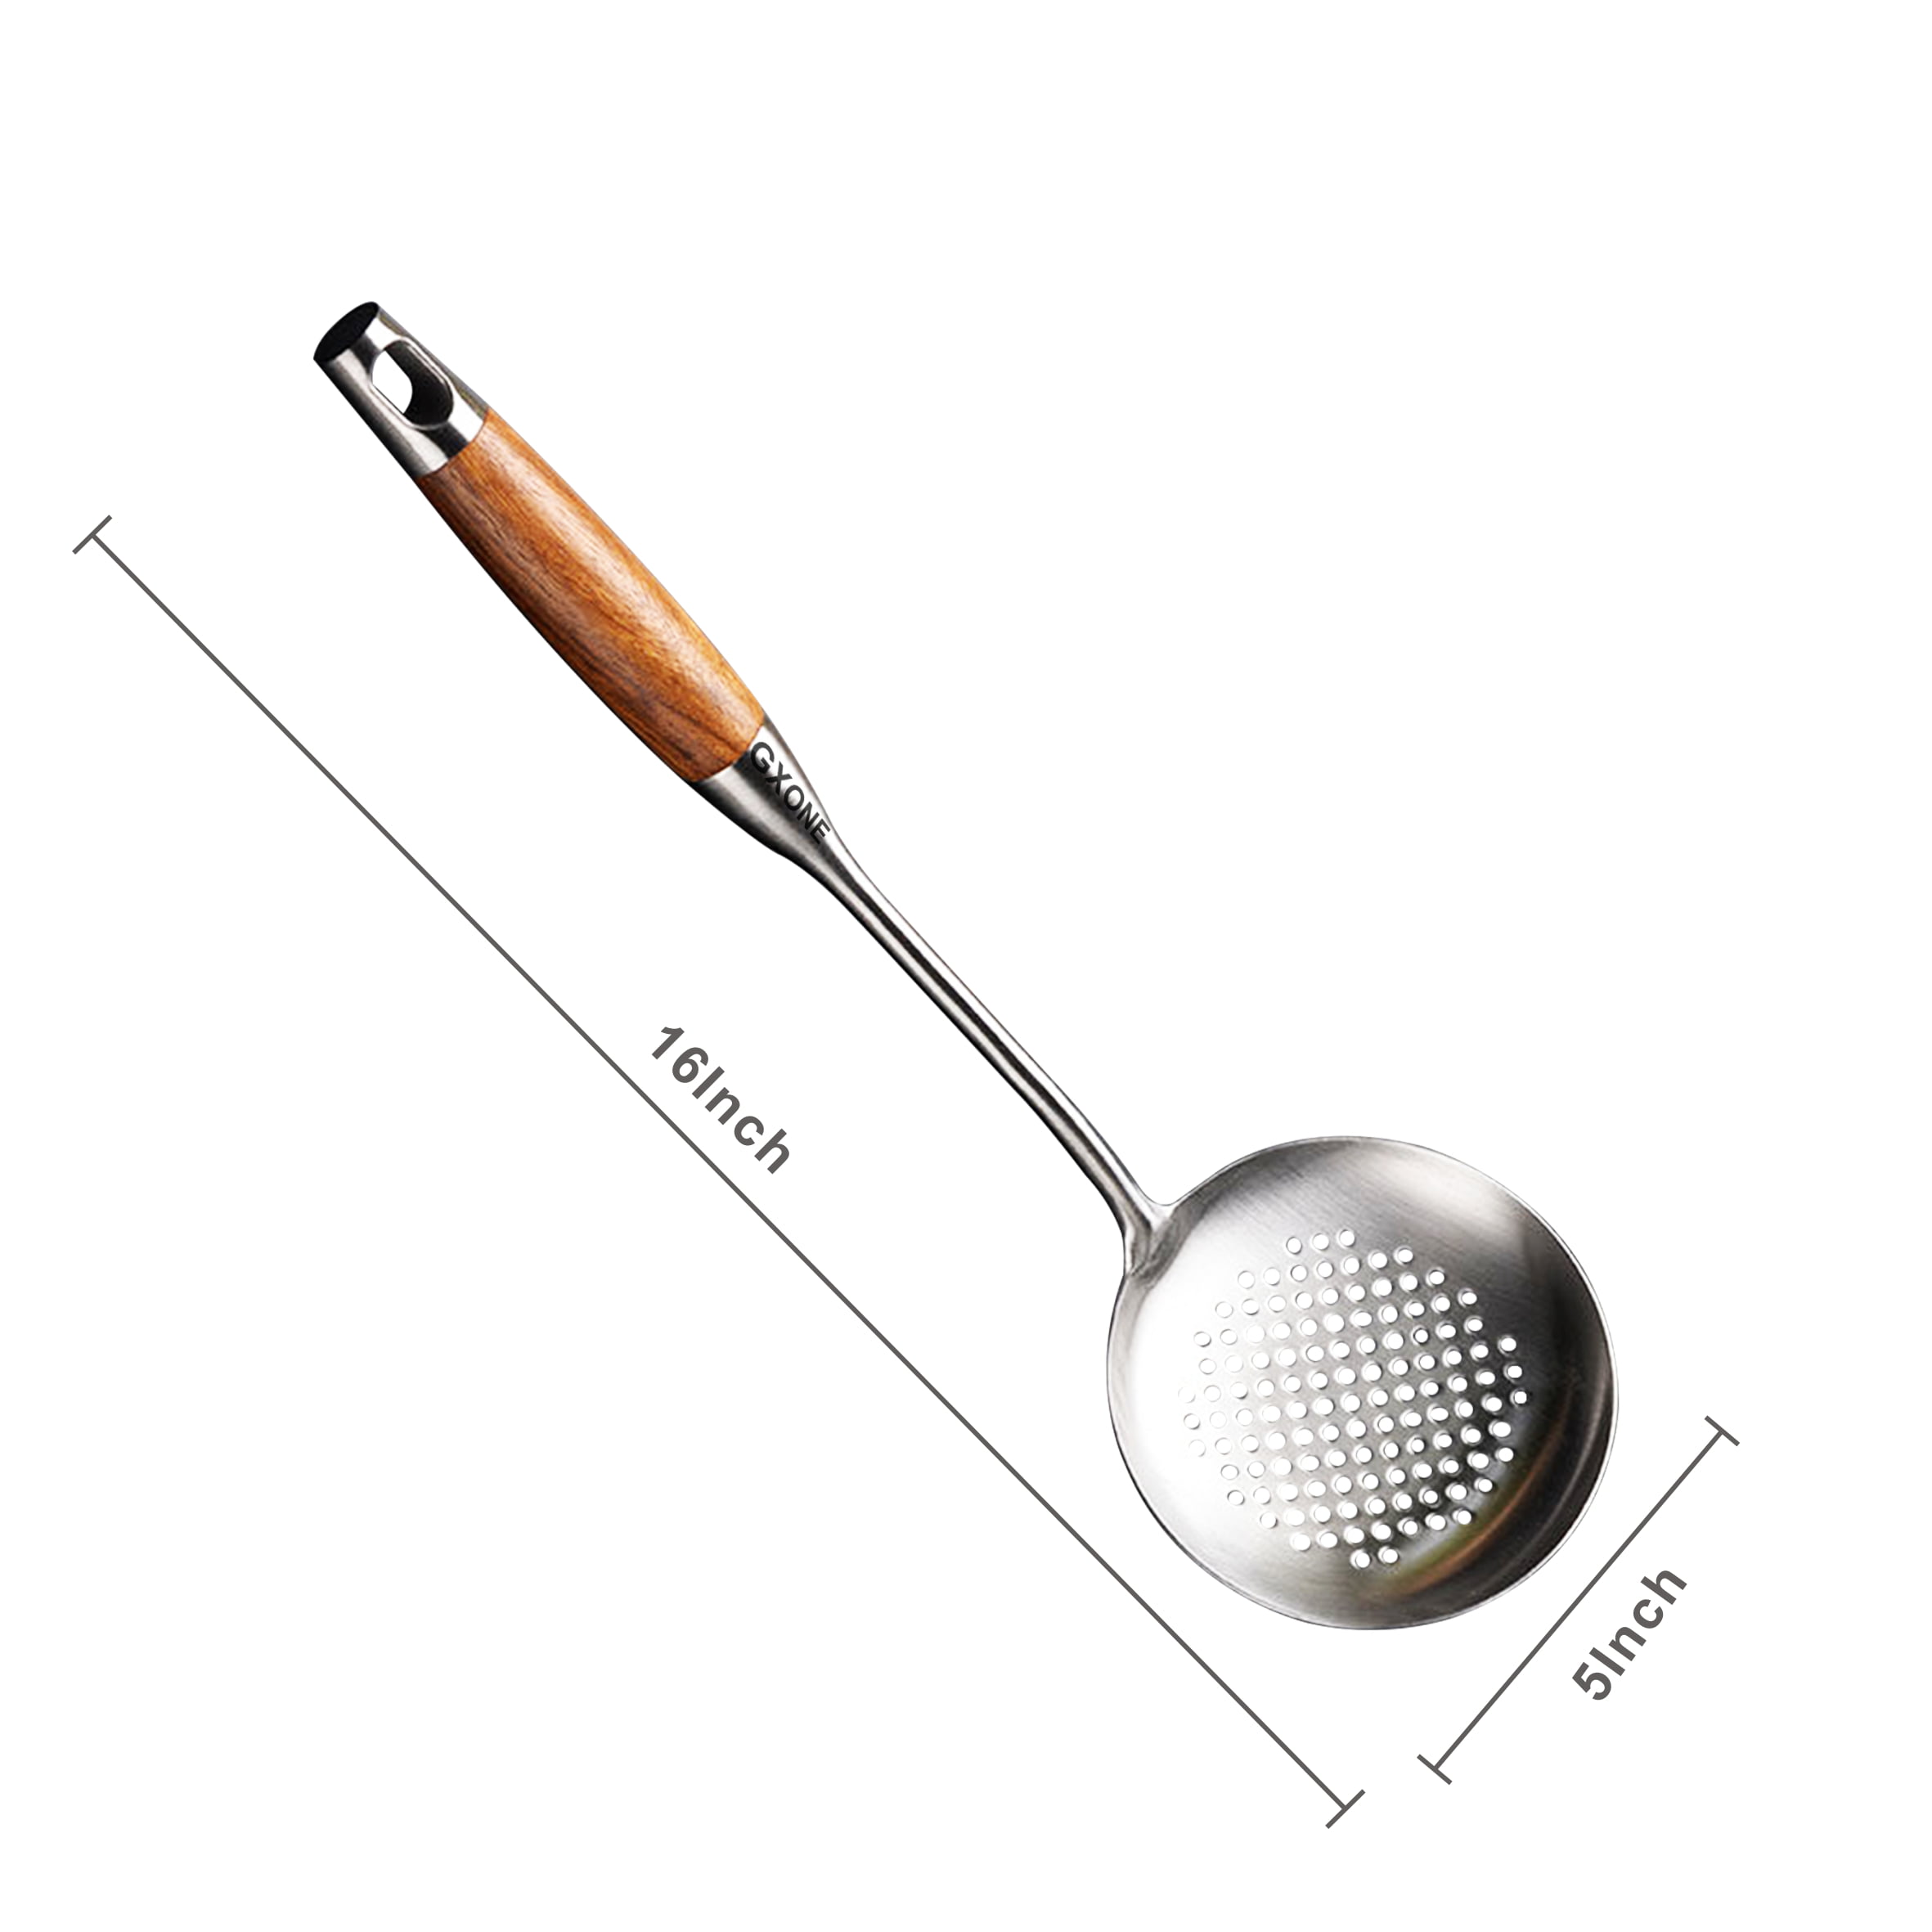 Igoolee Soup Ladle, Stainless Steel Sauce Ladle for Home Kitchen or Restaurant, 11 inch, Set of 2 - Ladle / Strainer Ladle